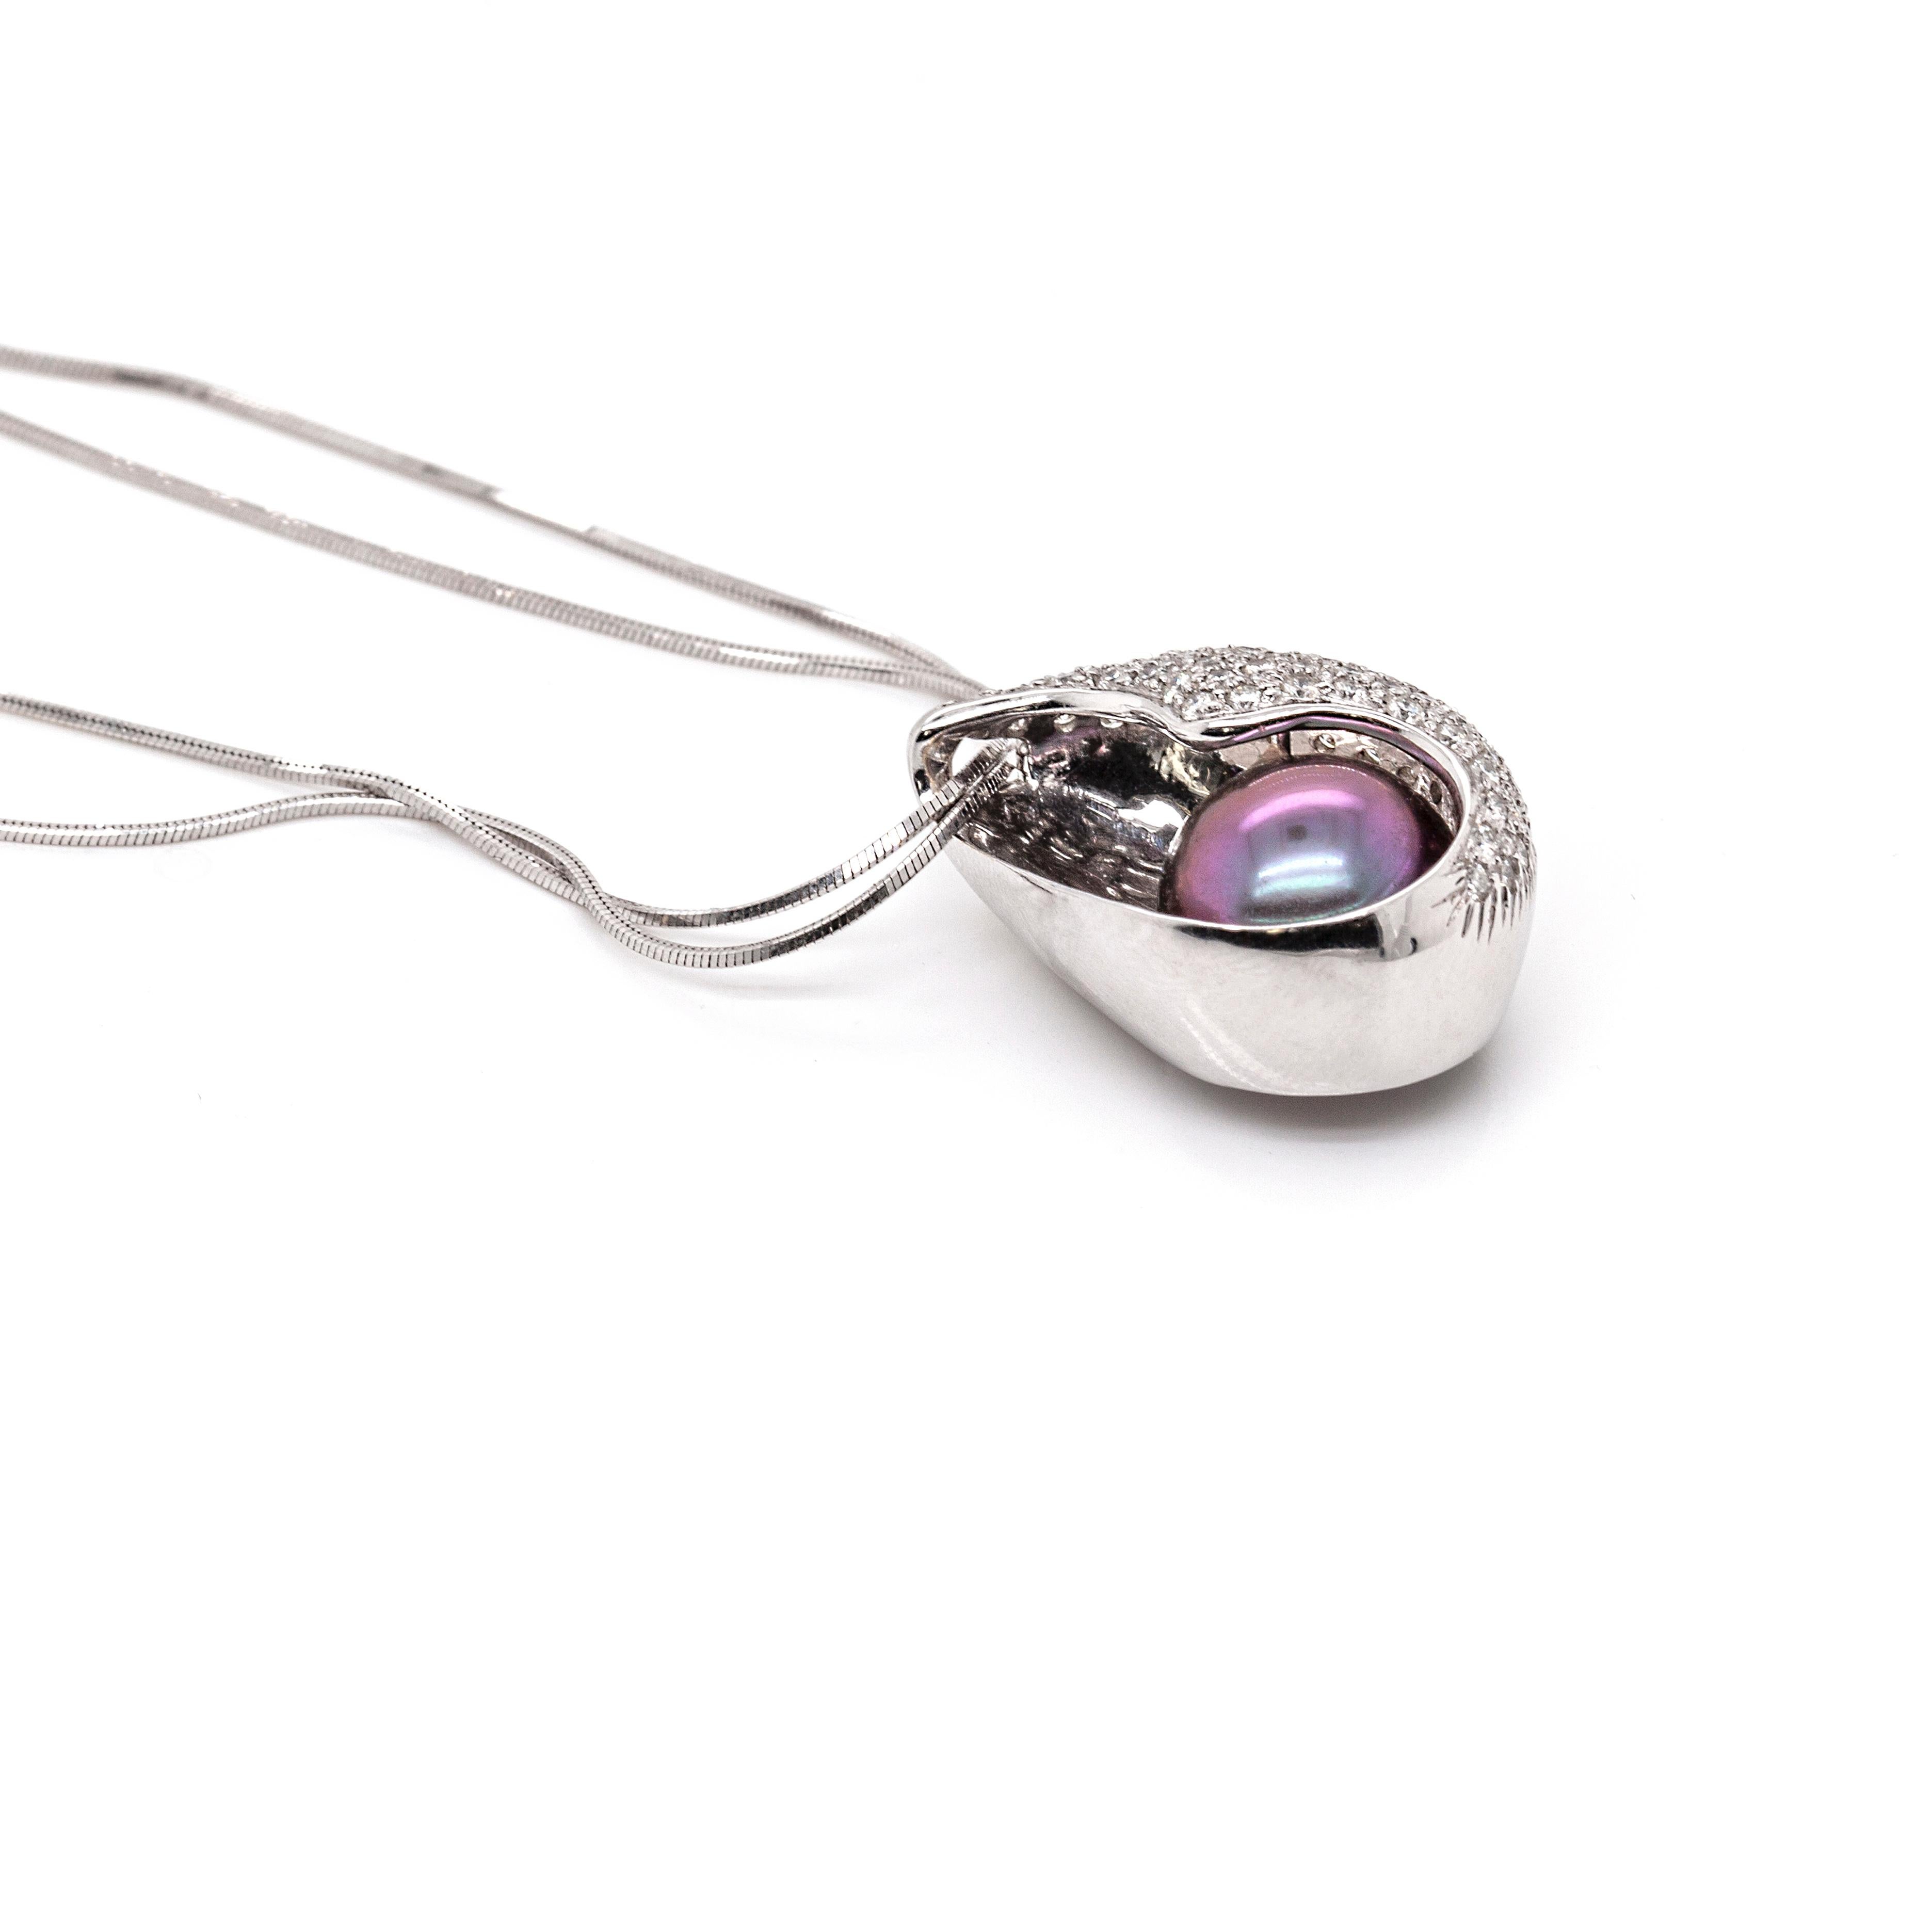 This is a striking Italian-made 18ct white gold necklace, featuring a gorgeous Tahitian pearl cradled in a pavé set conch shaped pendant. The pendant boasts approximately 0.65 carats of round brilliant cut diamonds. The back of the pendant is left